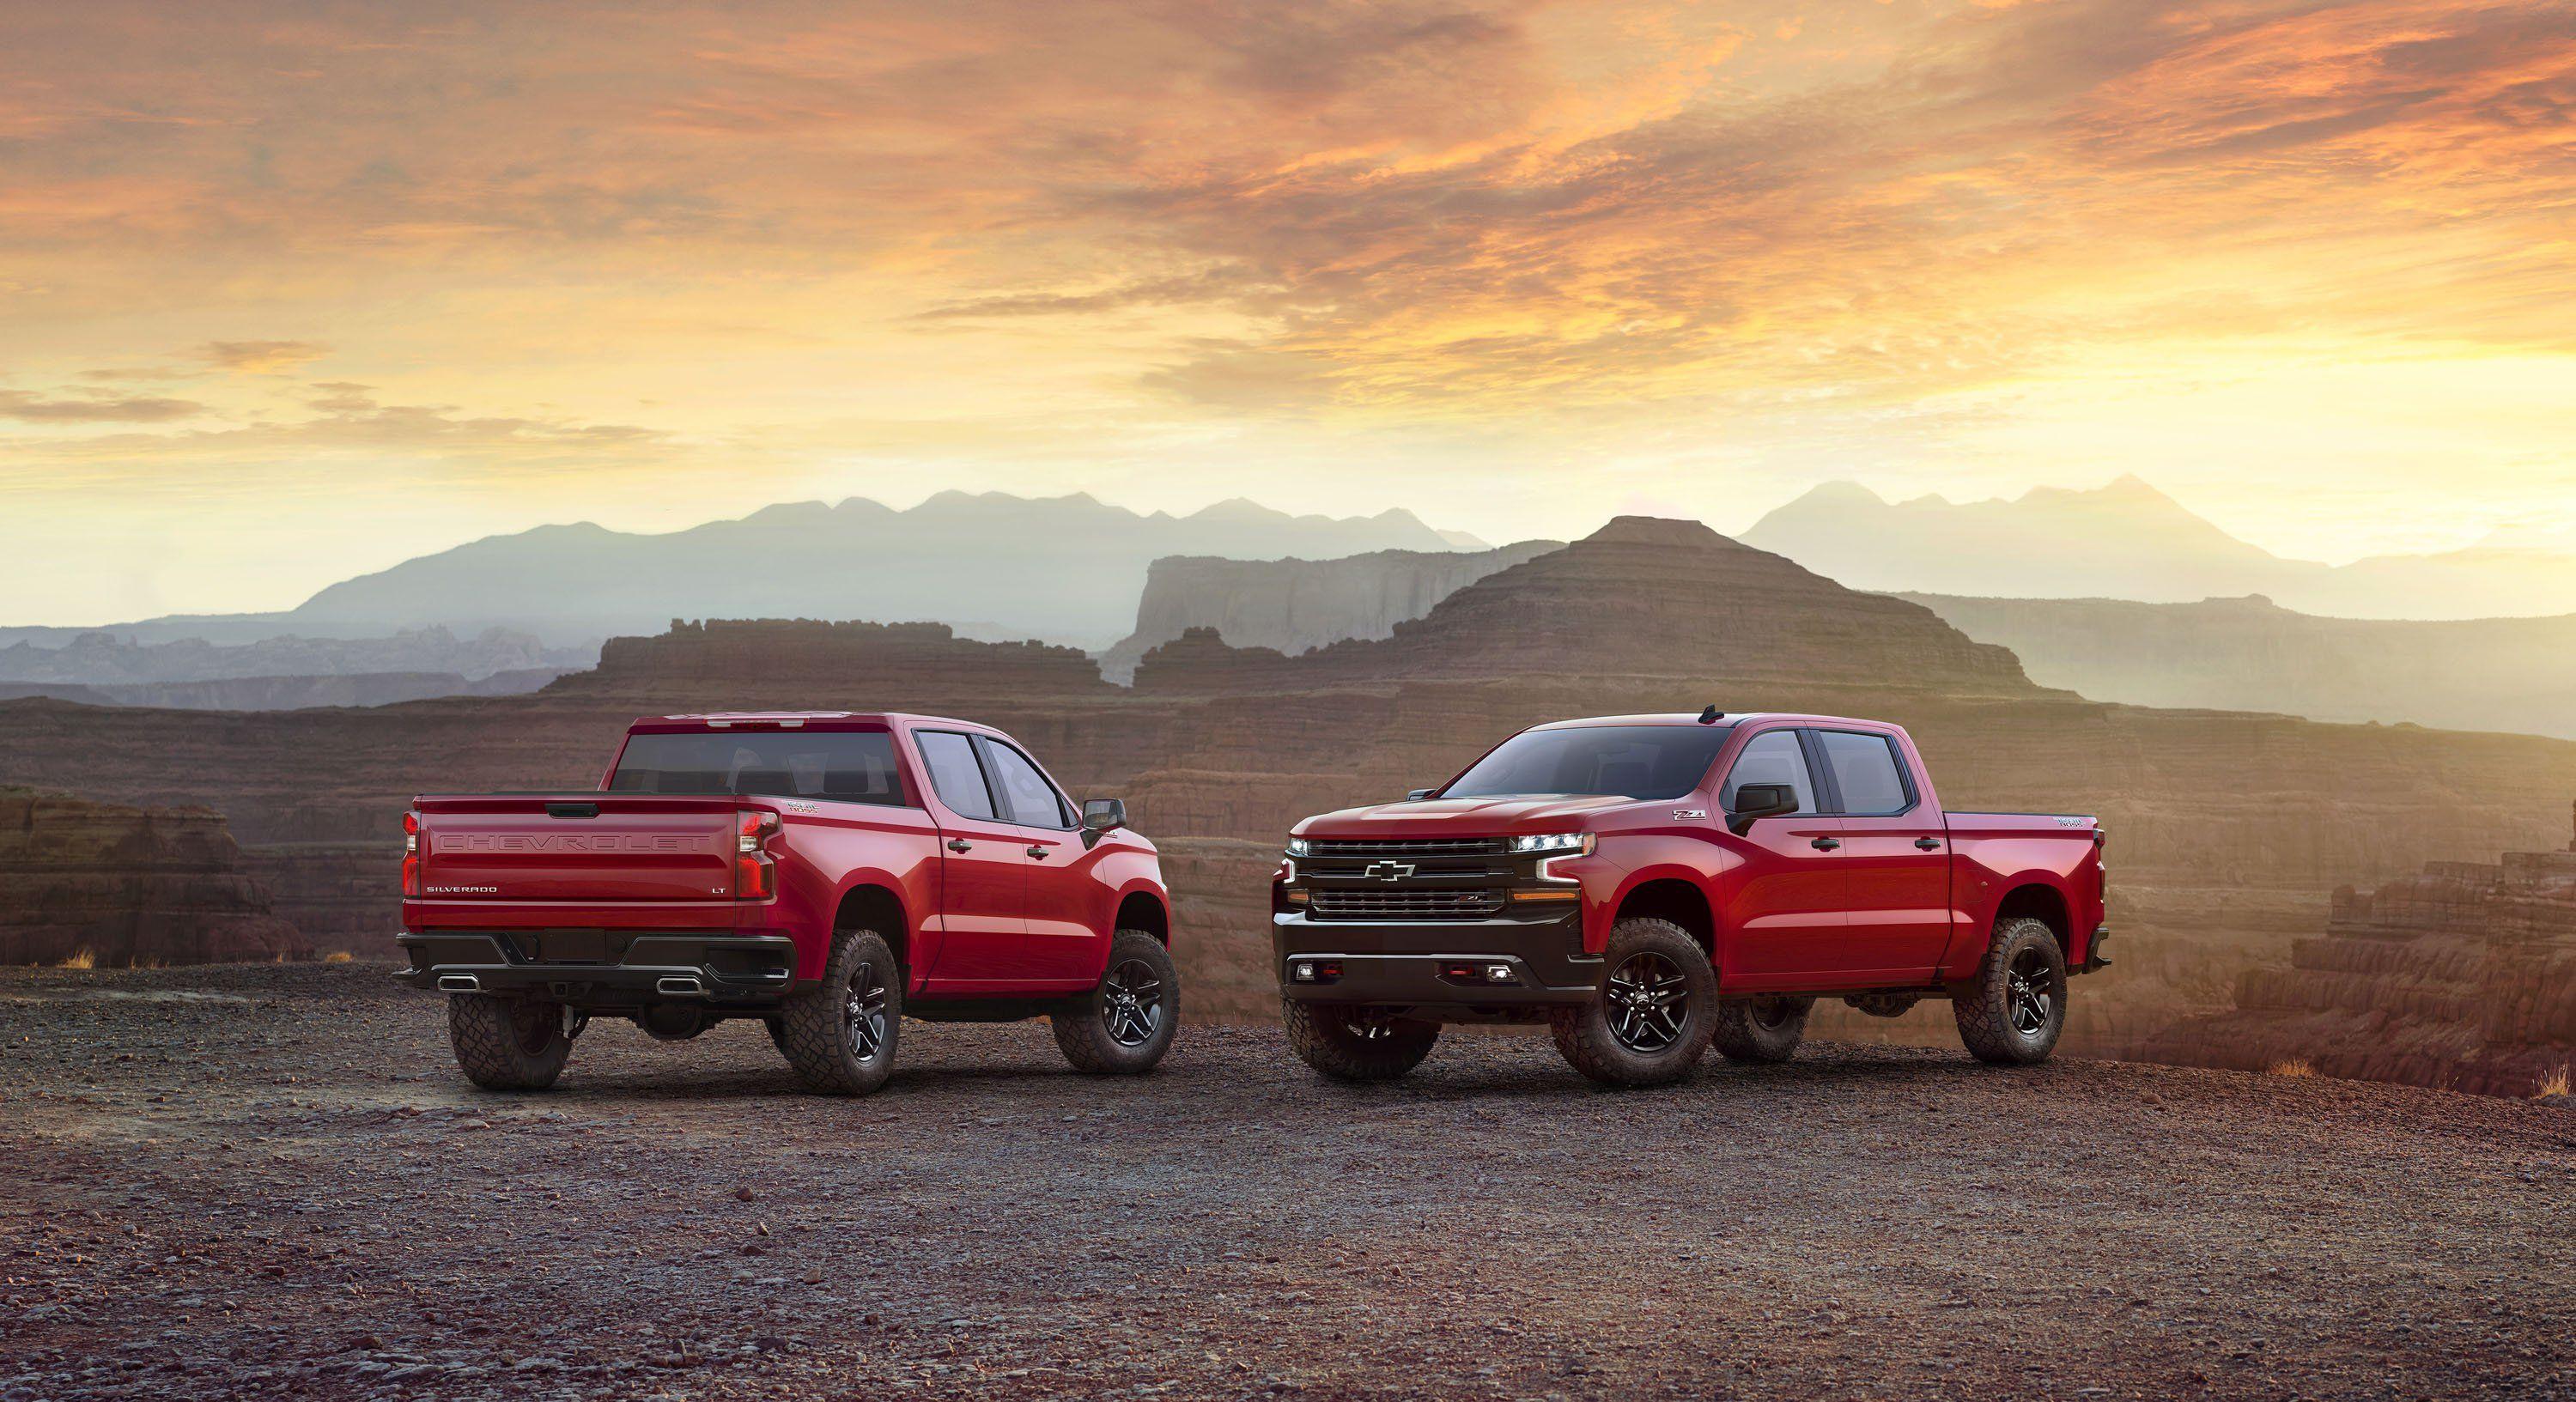 Wallpaper Selections Of The Day: 2019 Chevy Silverado